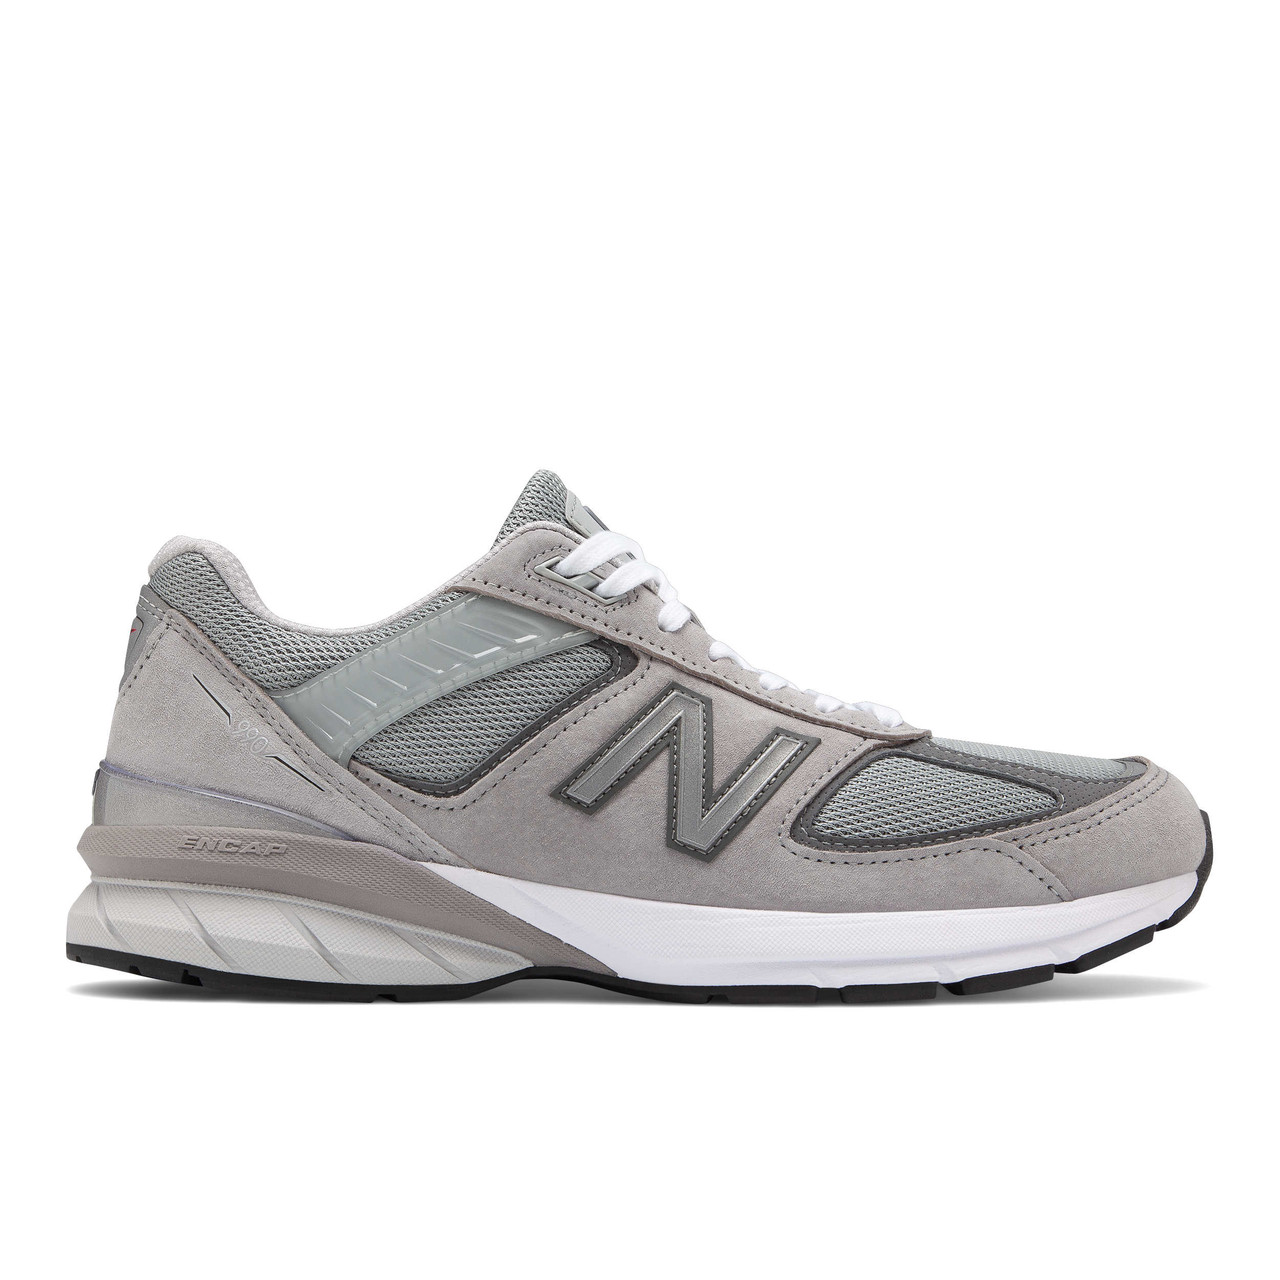 New Balance Men's M990GL5 in Gray. Made in USA Motion Control Running Shoe.  DISCONTINUED STYLE - Active Soles